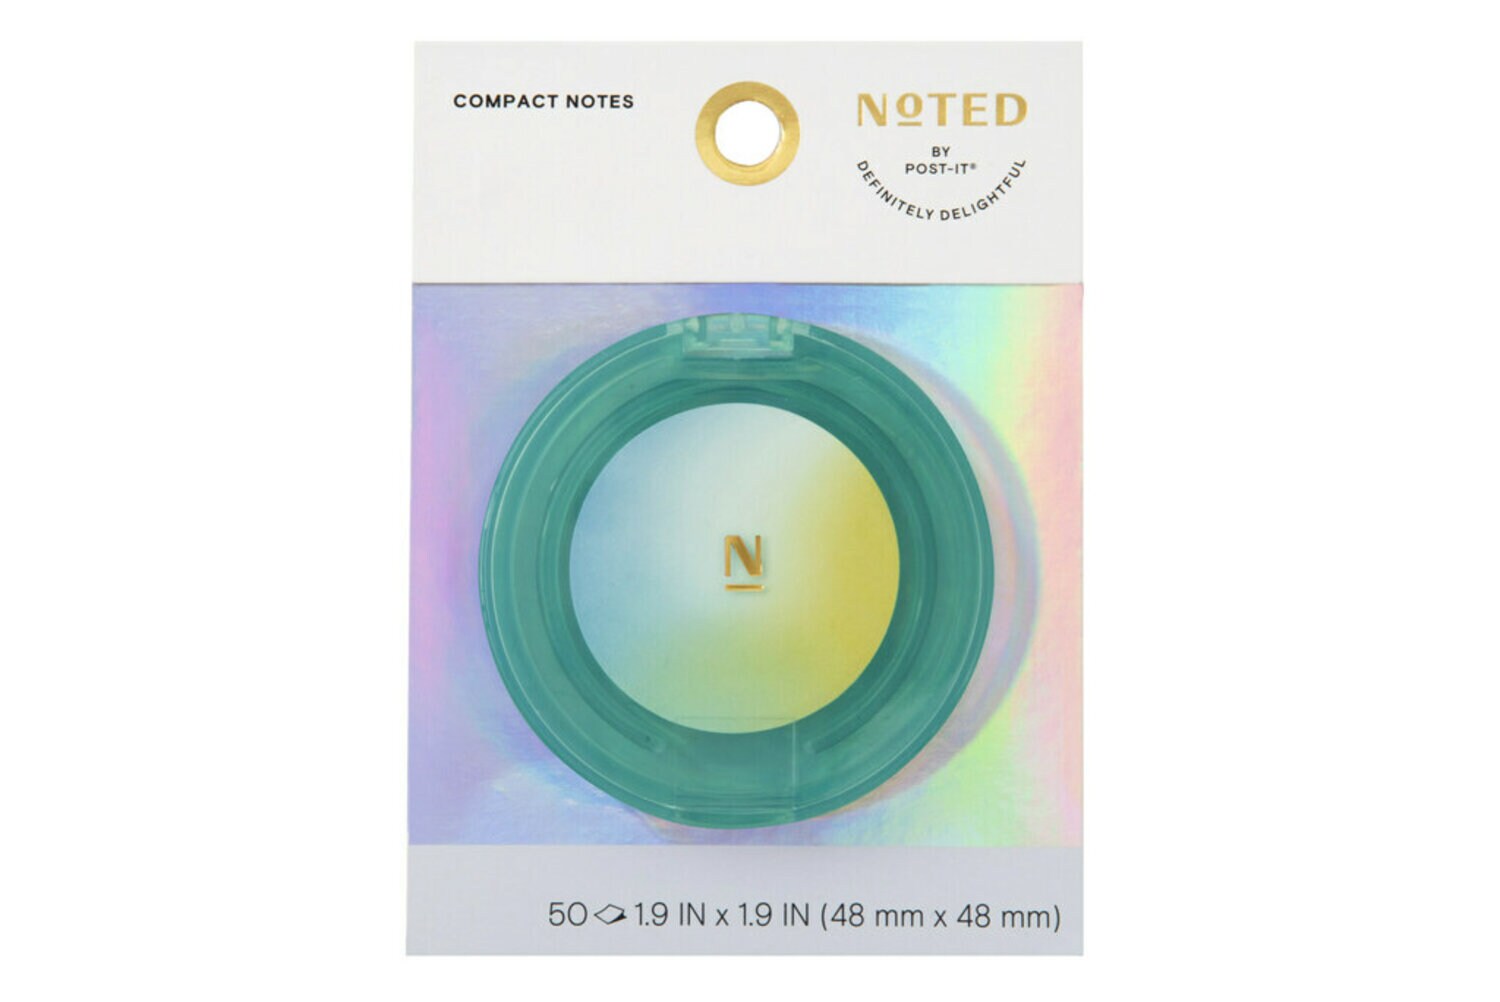 7100289141 - Post-it Compact Notes NTD7-C22-1, 1.9 in x 1.9 in (48 mm x 48 mm)